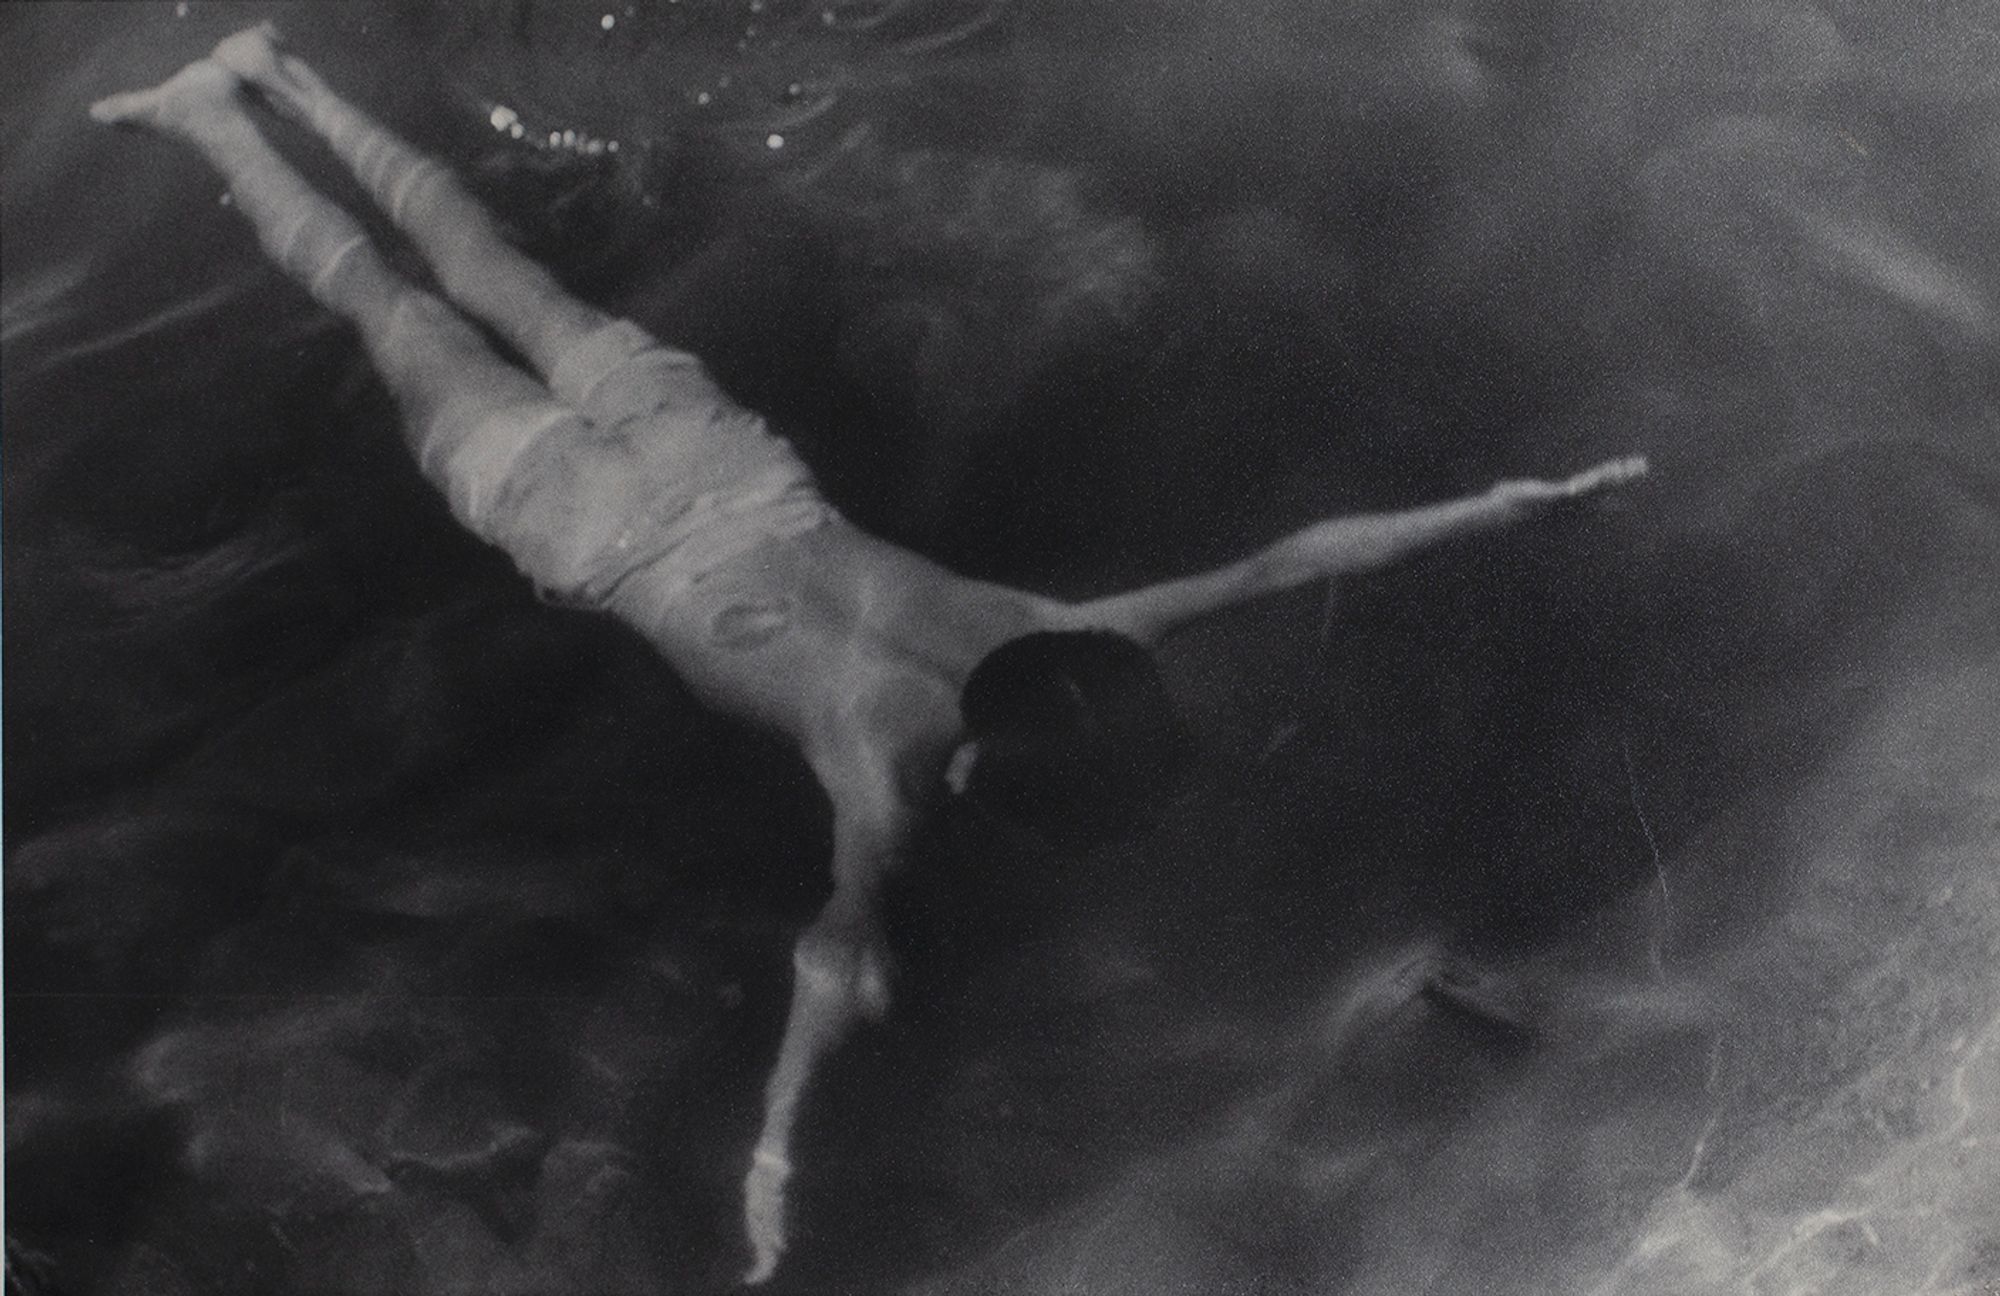 A black-and-white photograph of a swimmer underwater. The swimmer's body is shaped in a Y-formation as he extends his arms symmetrically straight out to his side